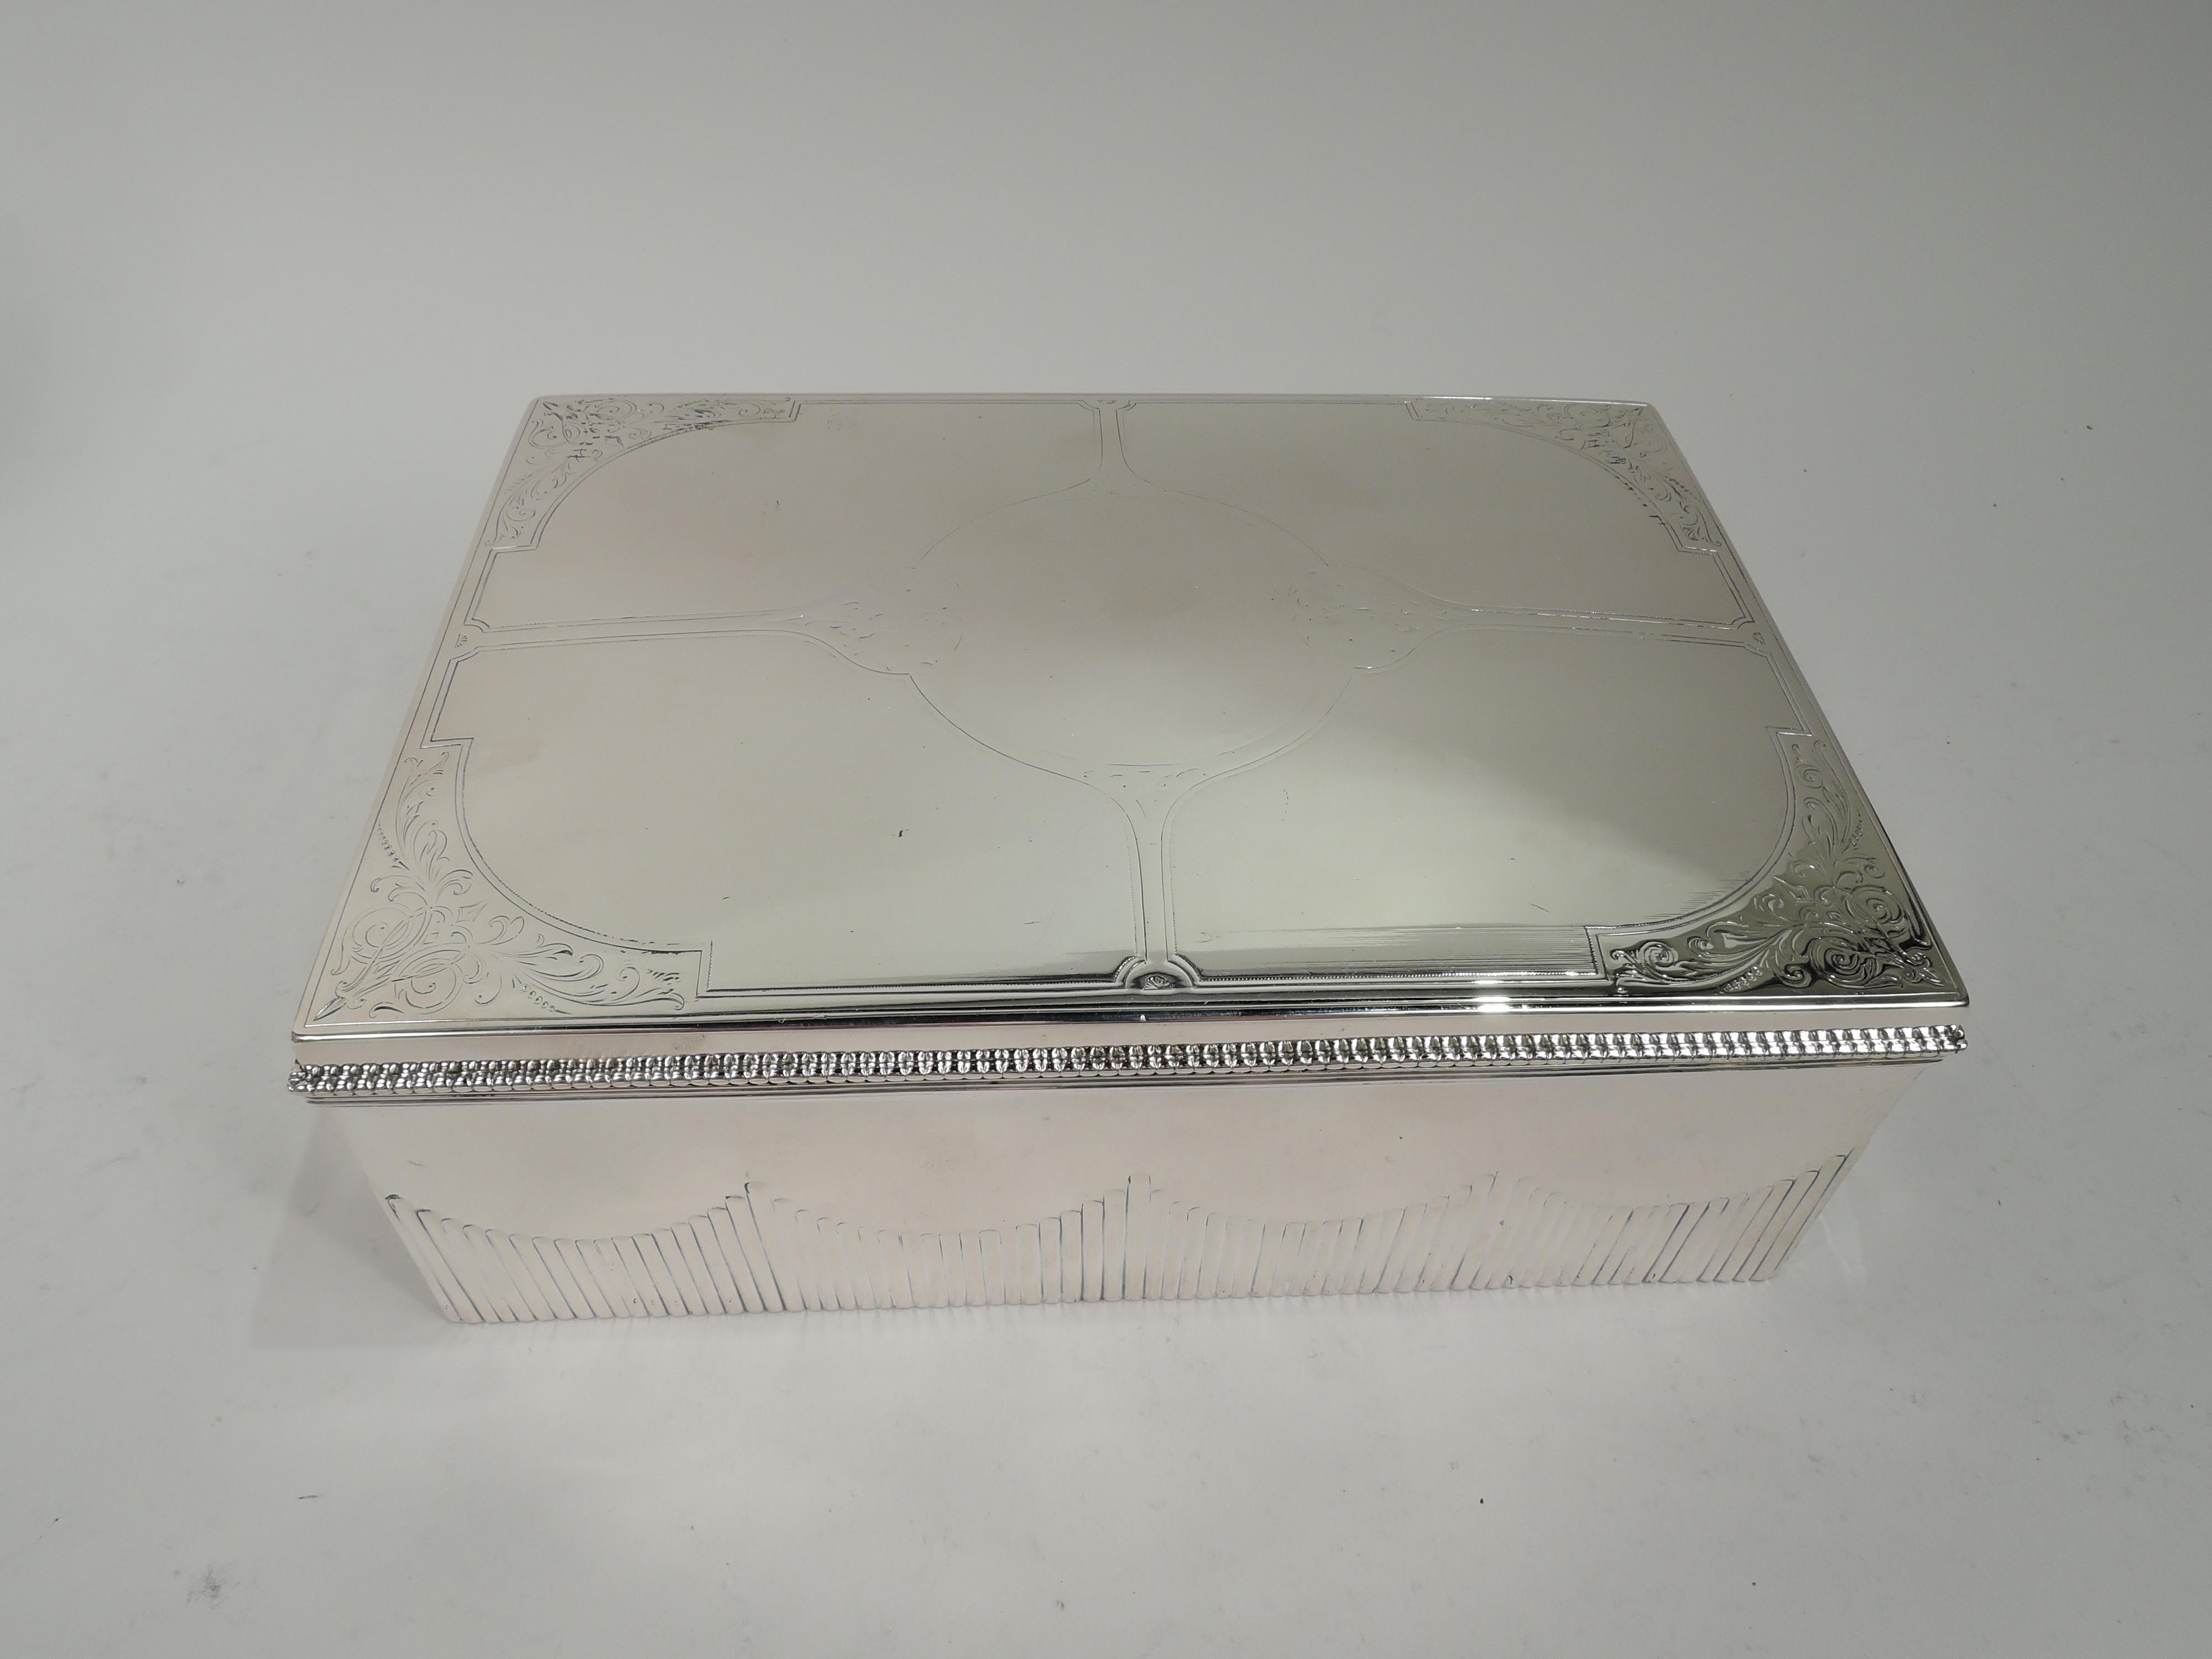 Large Dutch Art Nouveau Classical 833 silver box, 1915. Rectangular with straight sides wraparound fluted swags. Cover hinged with beaded rim. Cover top has central medallion with four stretches and fluid scrolling leaf ornament in curvilinear